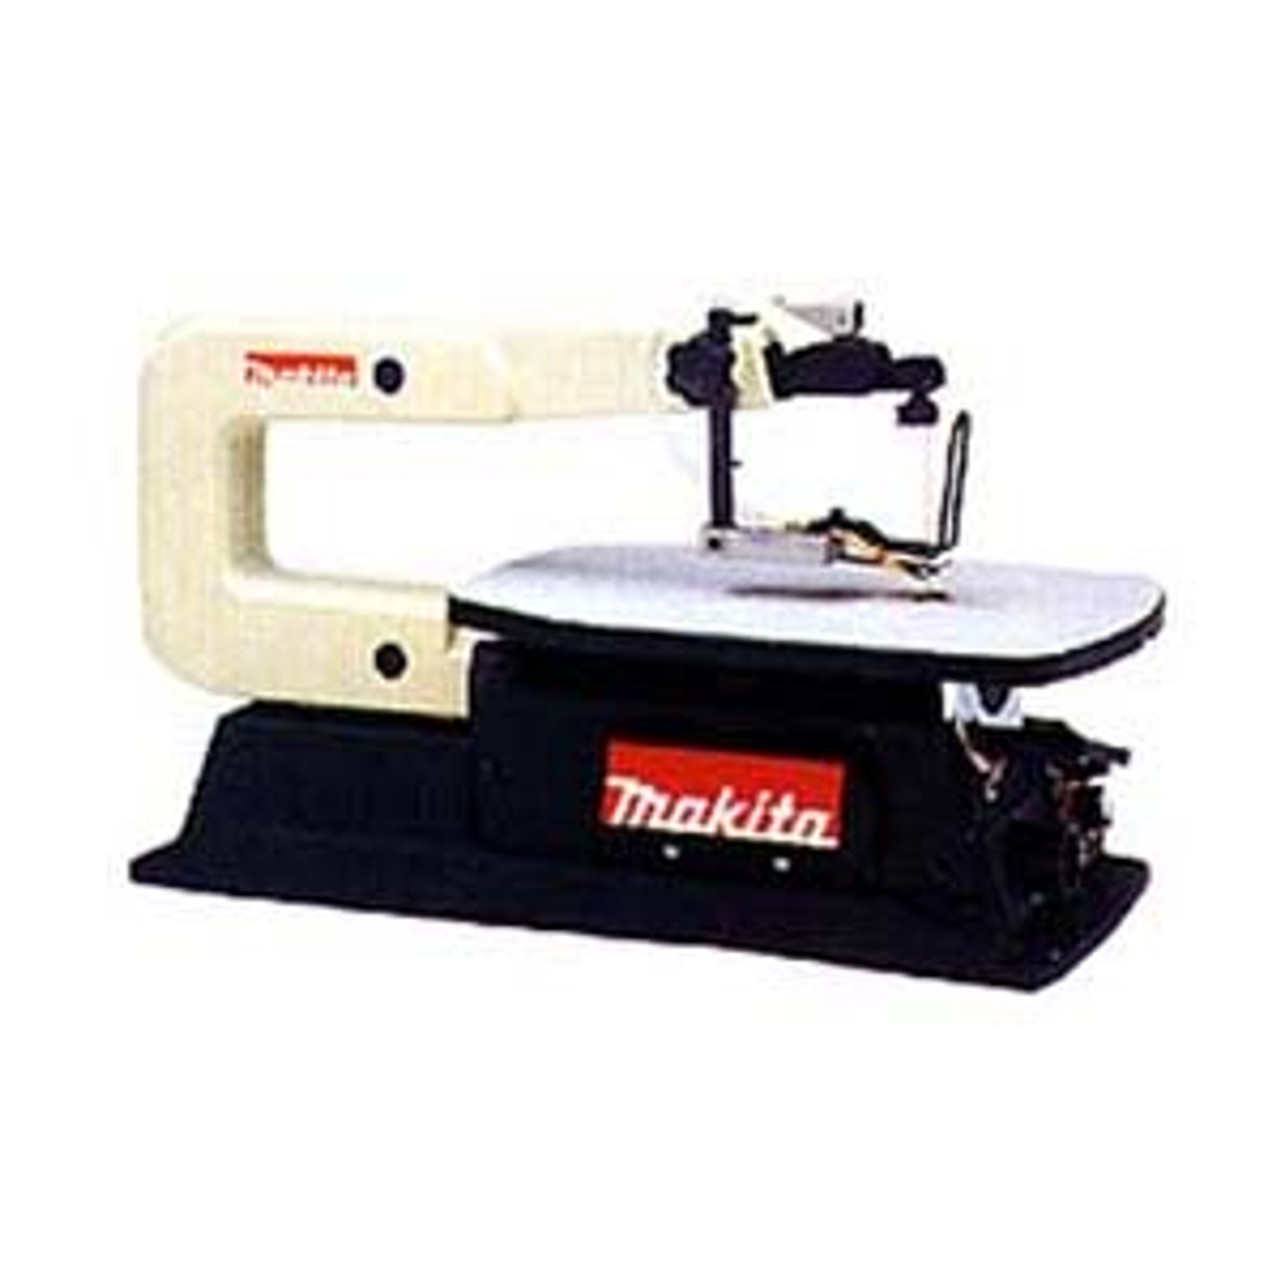 Buy Scroll  Saw  16in Var Speed Makita  at Busy Bee Tools